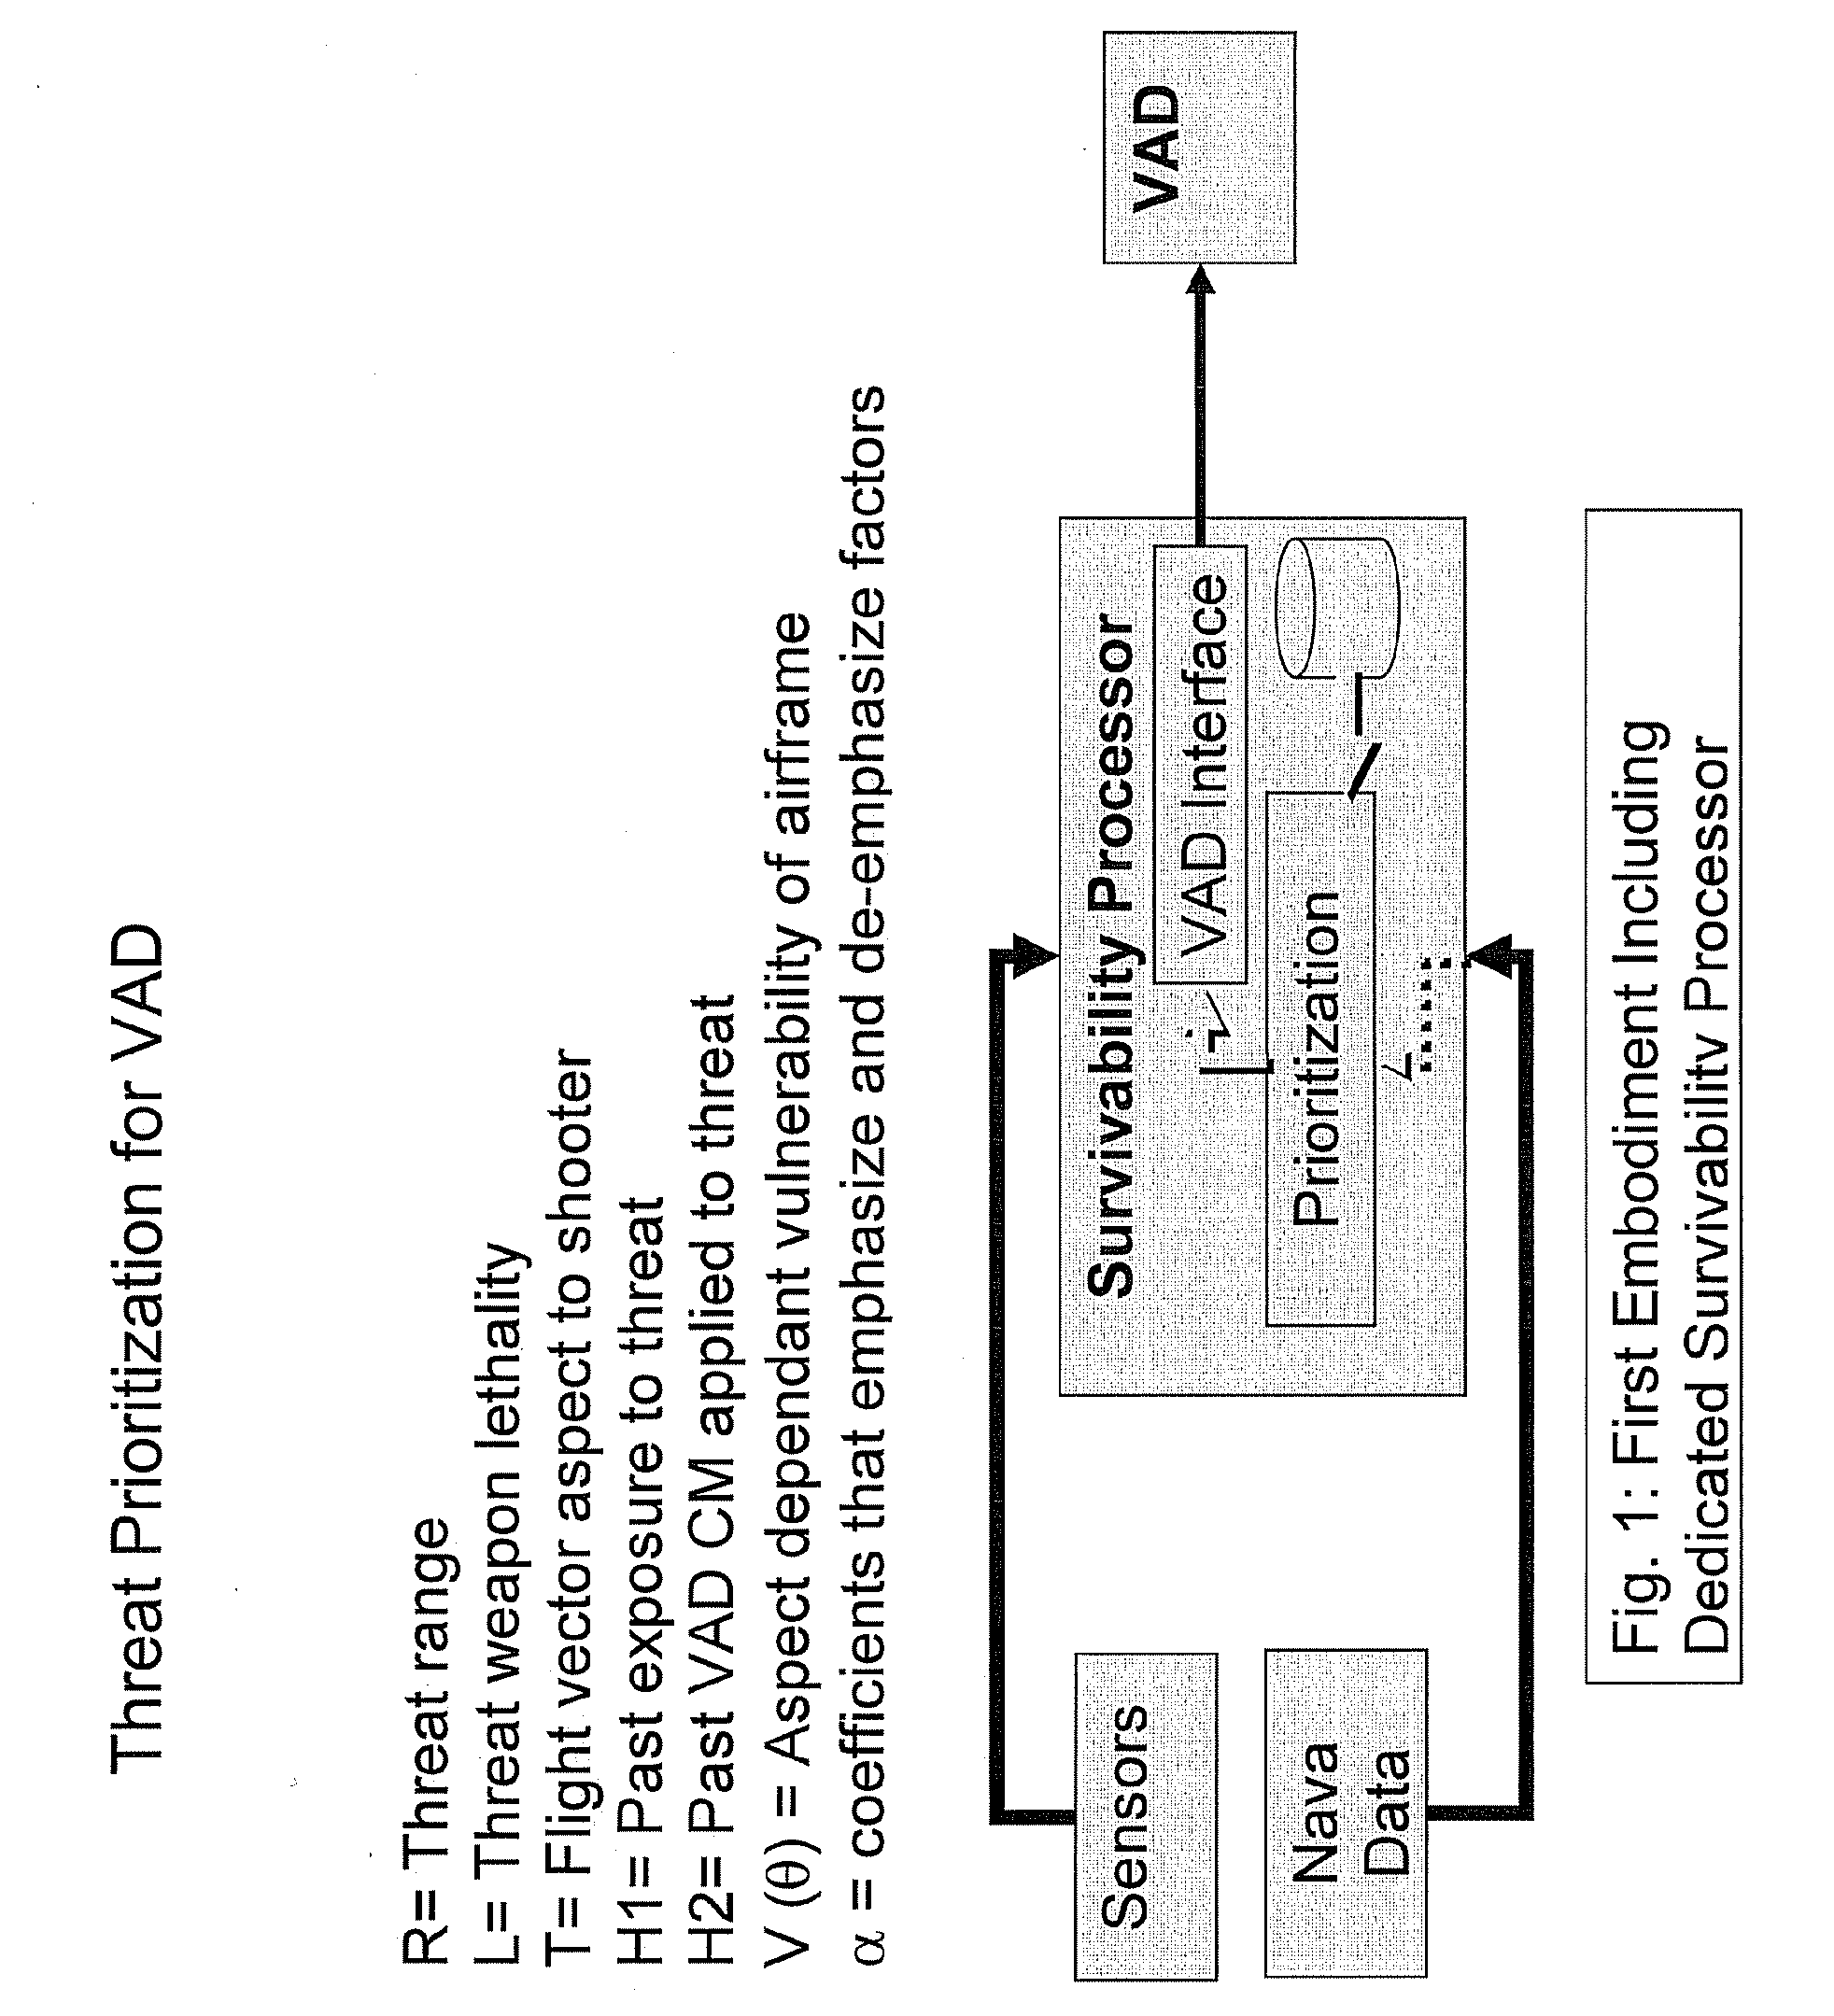 System and method for prioritizing visually aimed threats for laser-based countermeasure engagement